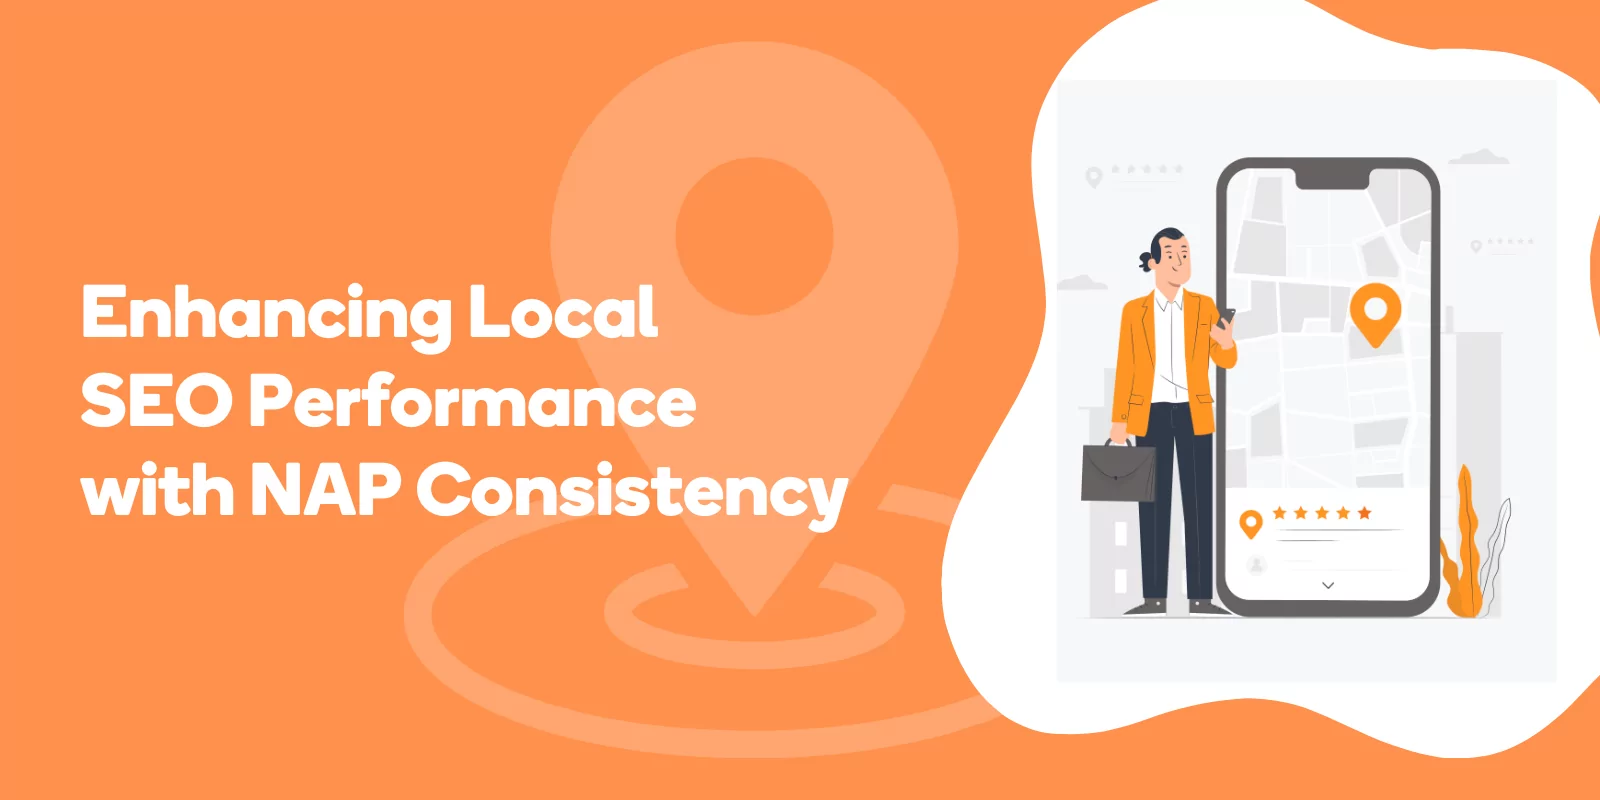 Enhancing Local SEO Performance with NAP Consistency